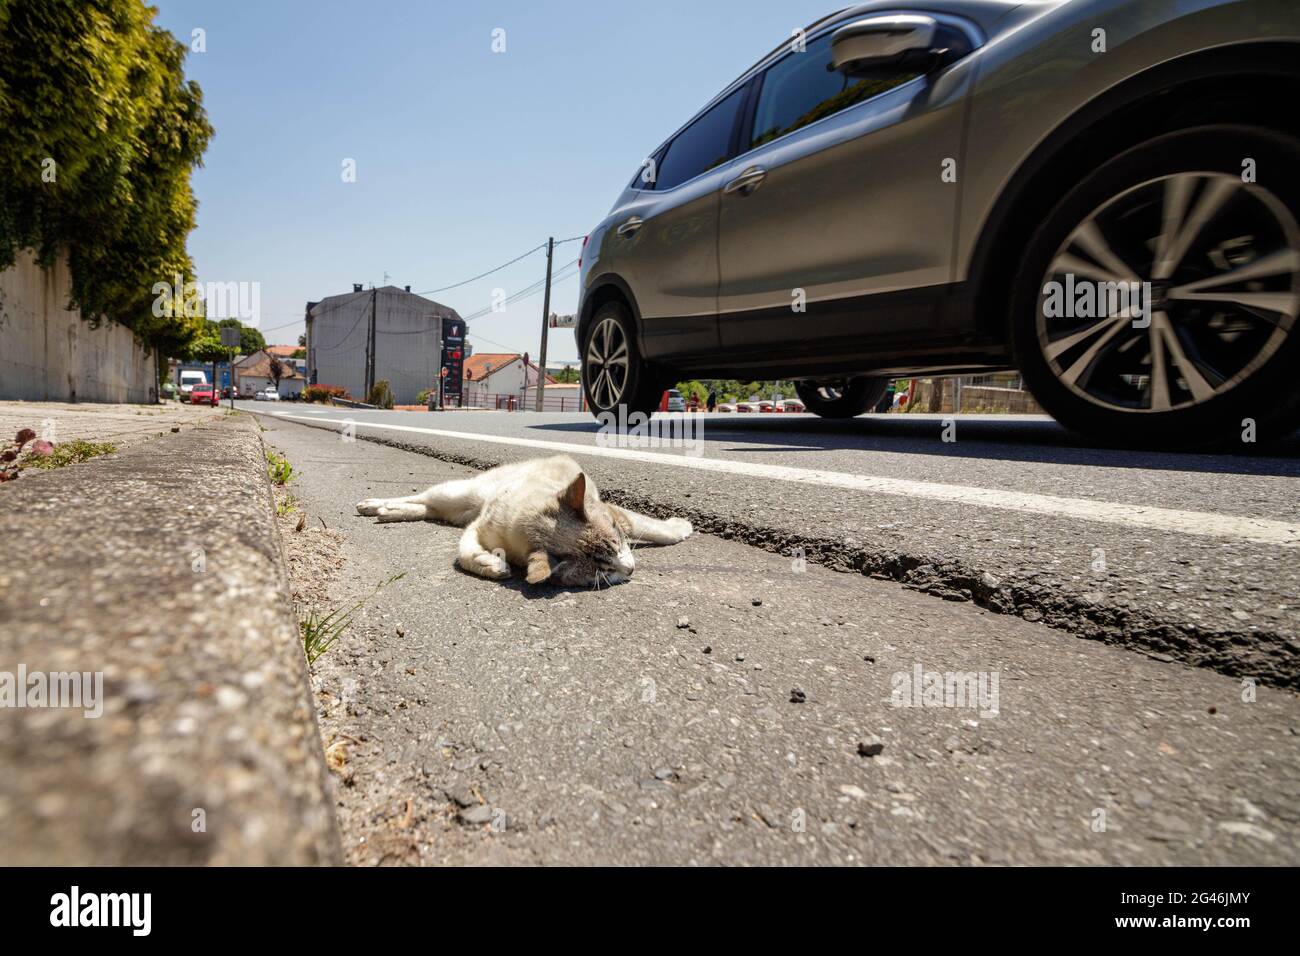 Coruna, Spain - June 11 2021: Small white and brown cat lies dead in the gutter at the side of a road as a car goes past Stock Photo